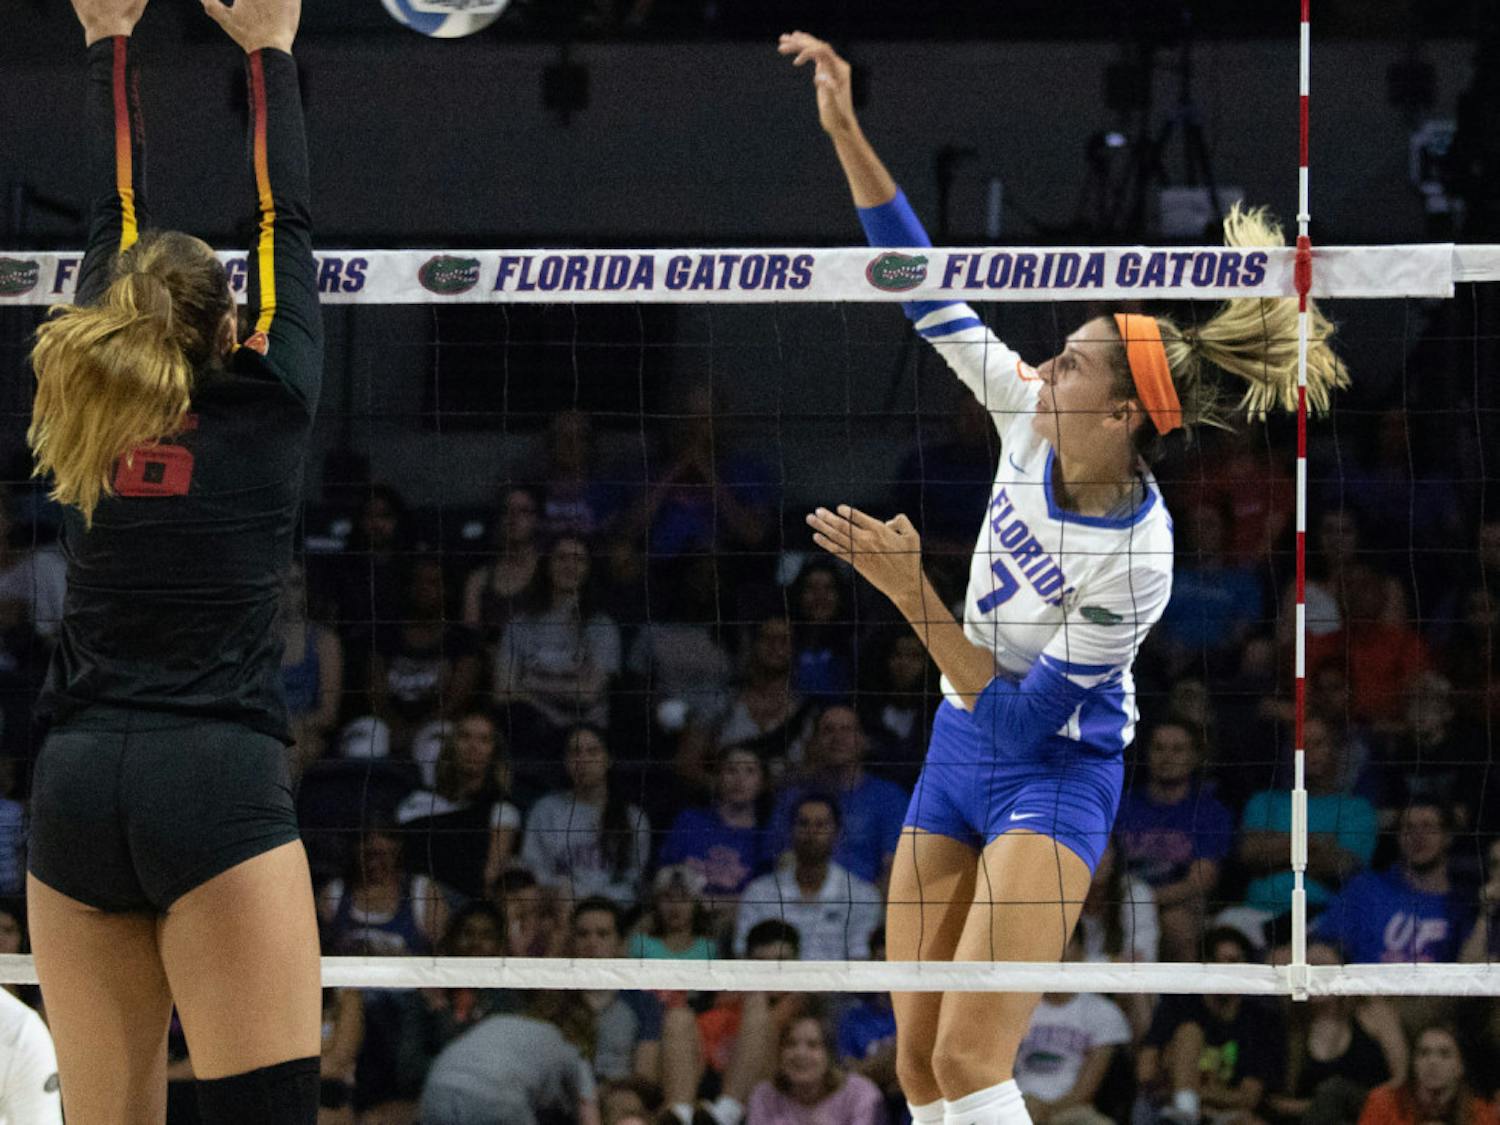 Junior outside hitter Paige Hammons led all players with 12 kills in Sunday's match between No. 11 Florida and Mississippi State in Starkville, Mississippi.&nbsp;